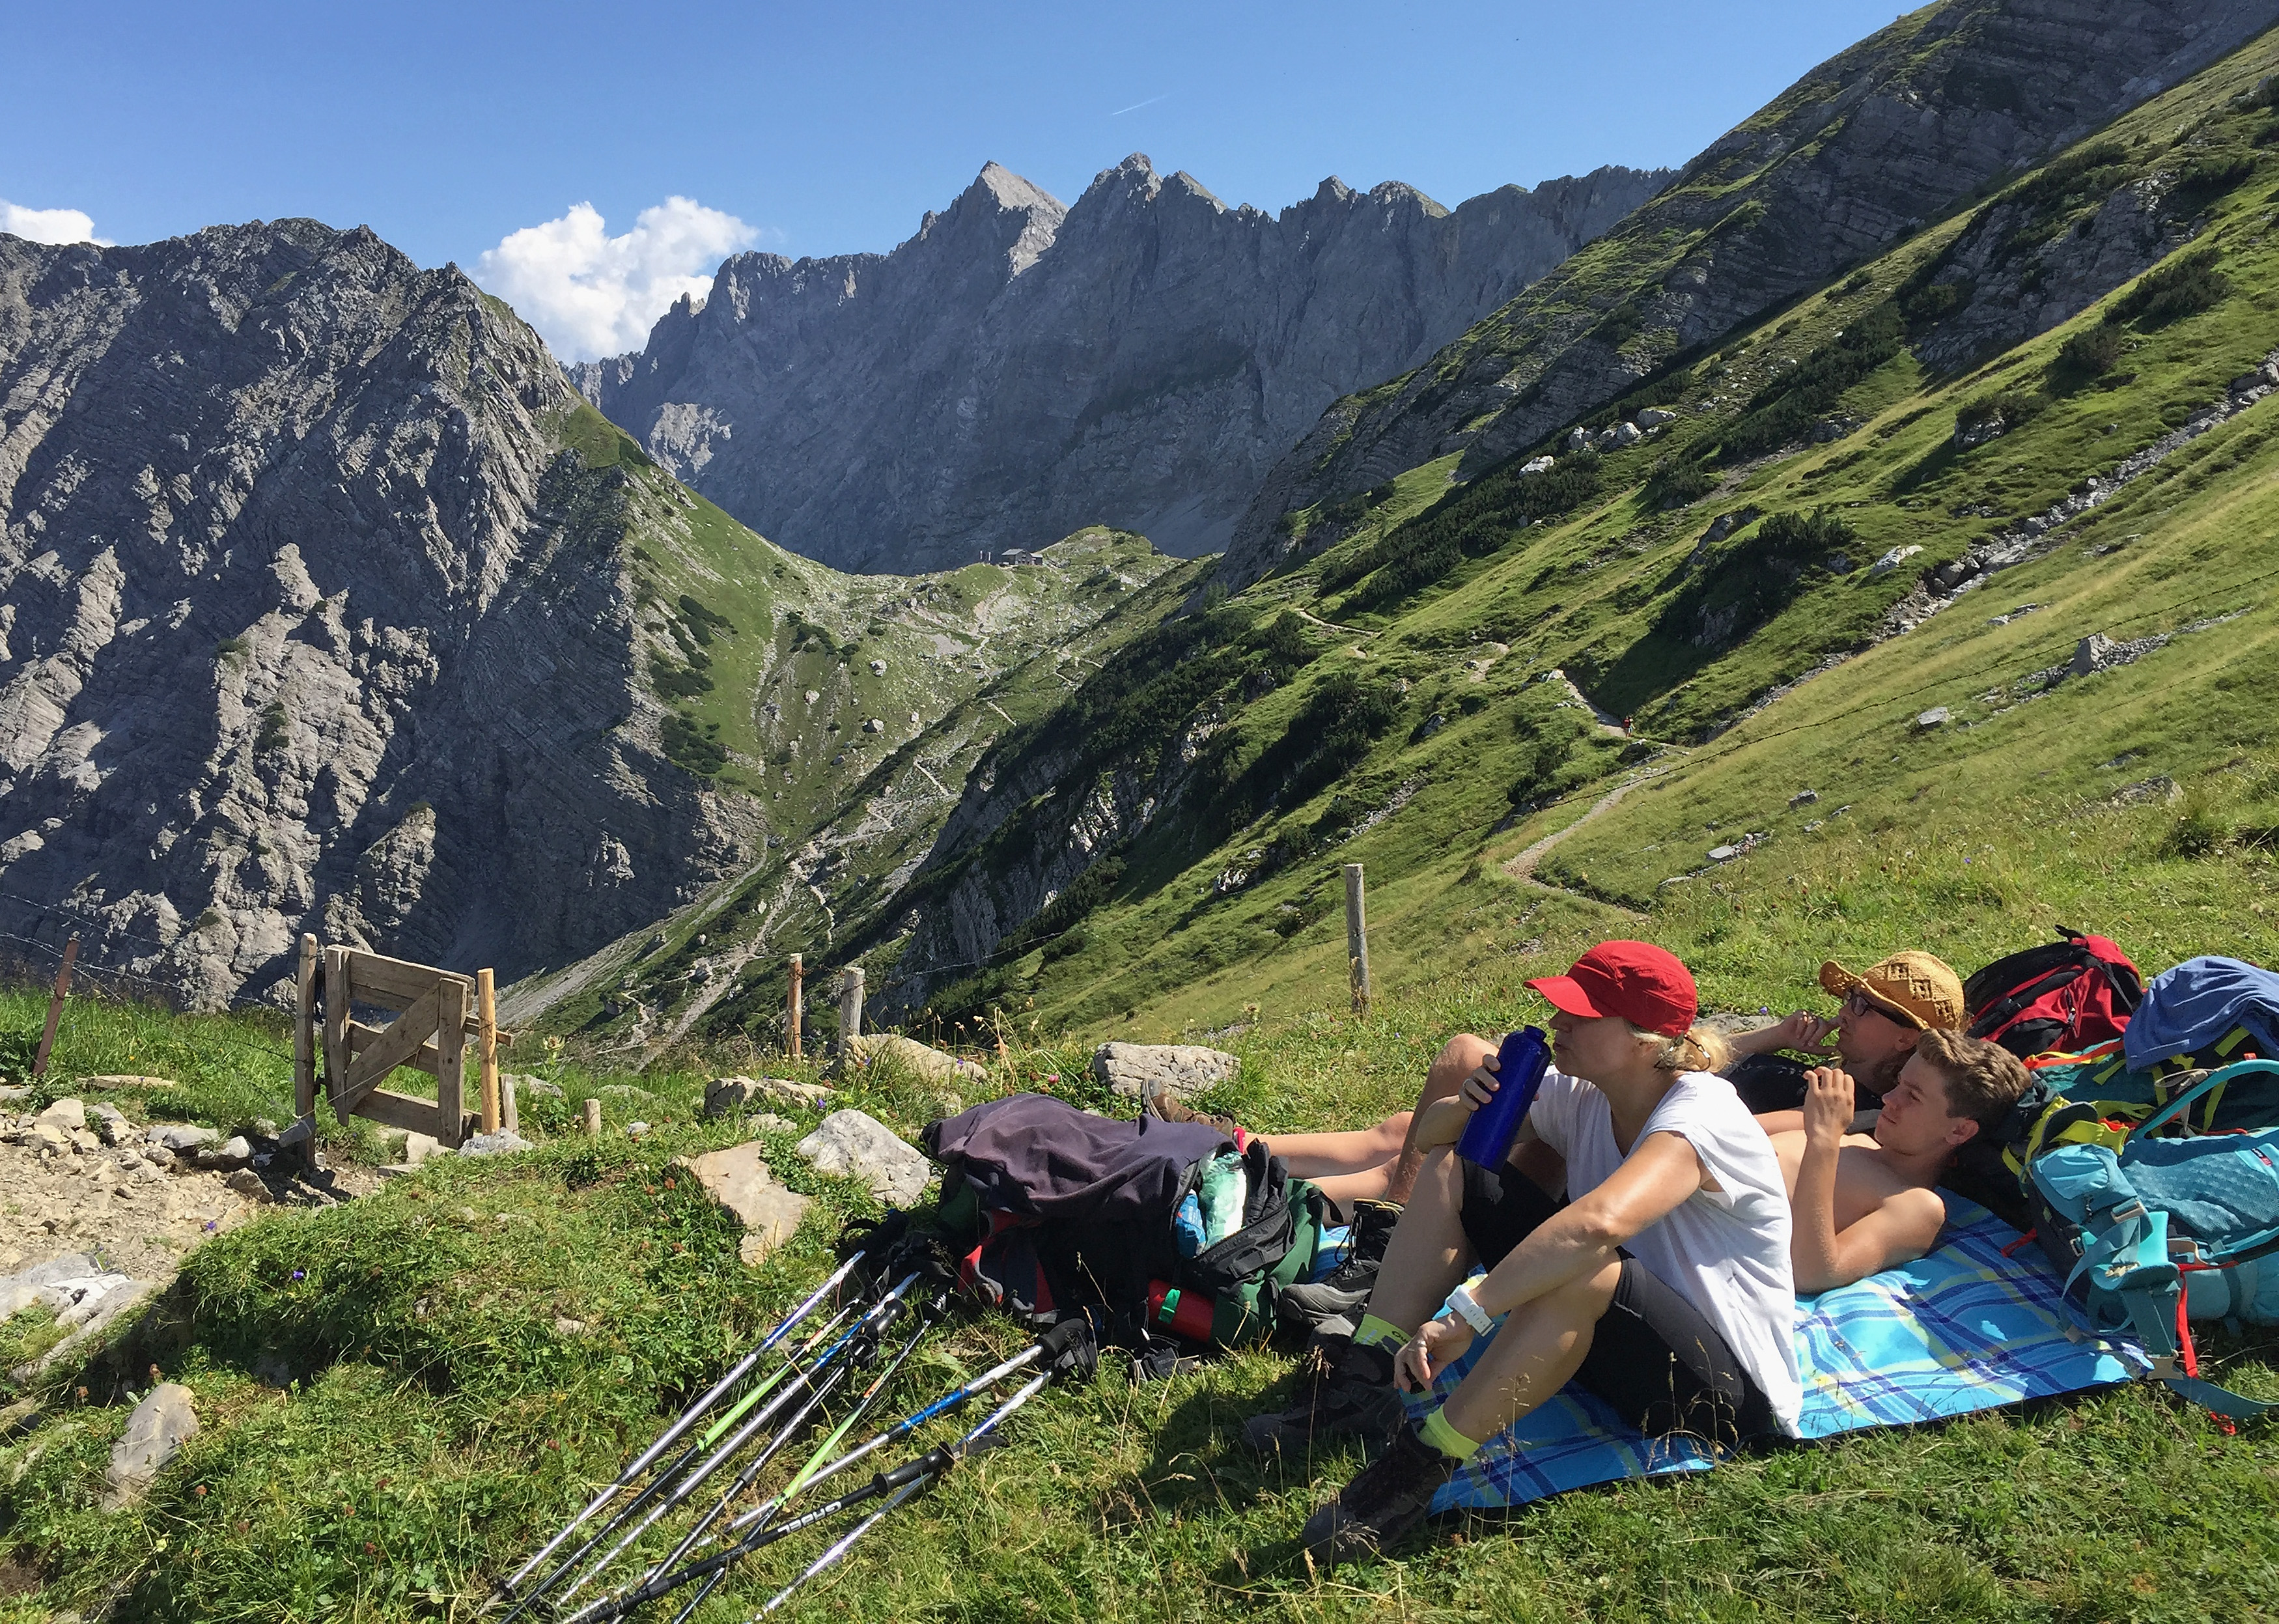 Hiking huts in the Alps: 6 great places to stay | CNN Travel